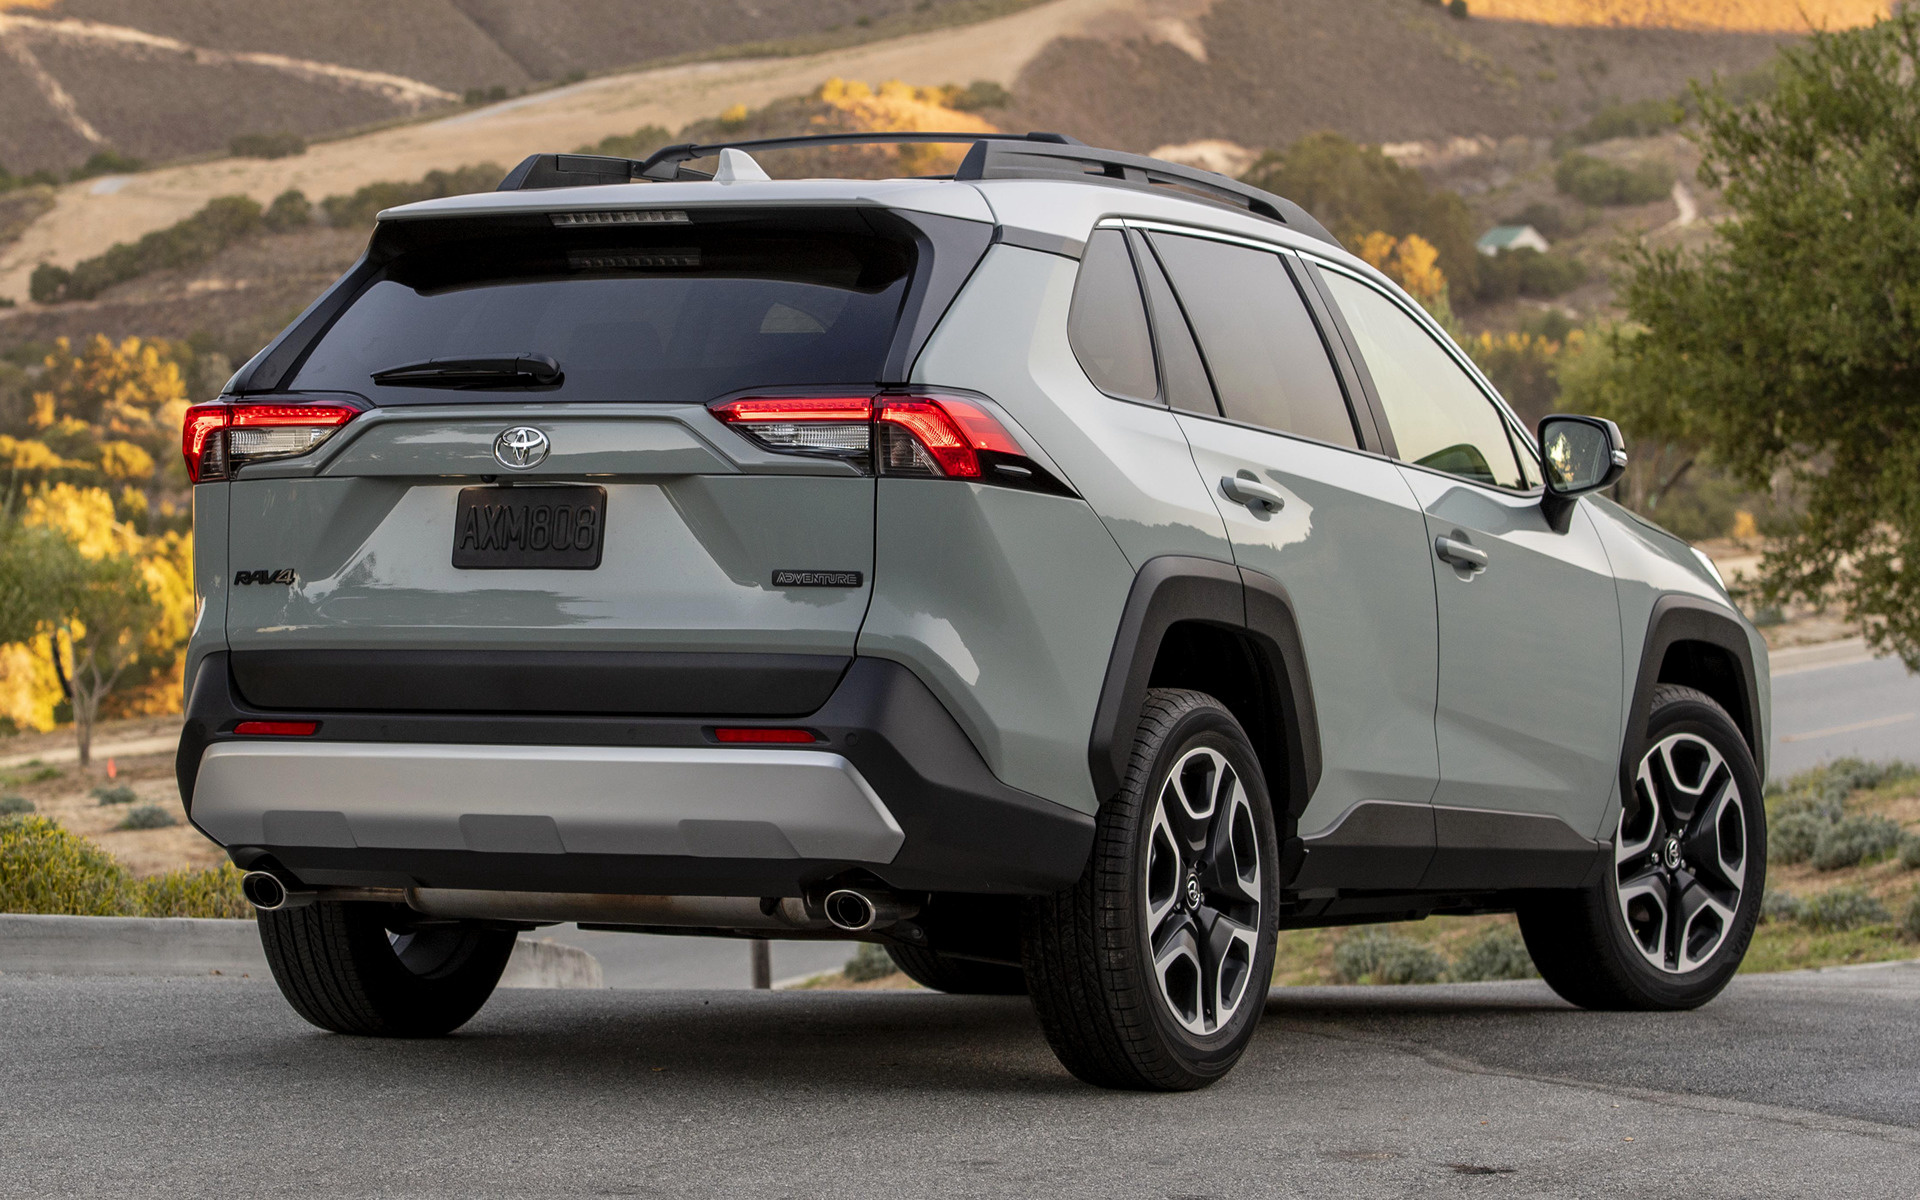 2019 Toyota RAV4 Adventure (US) - Wallpapers and HD Images | Car Pixel